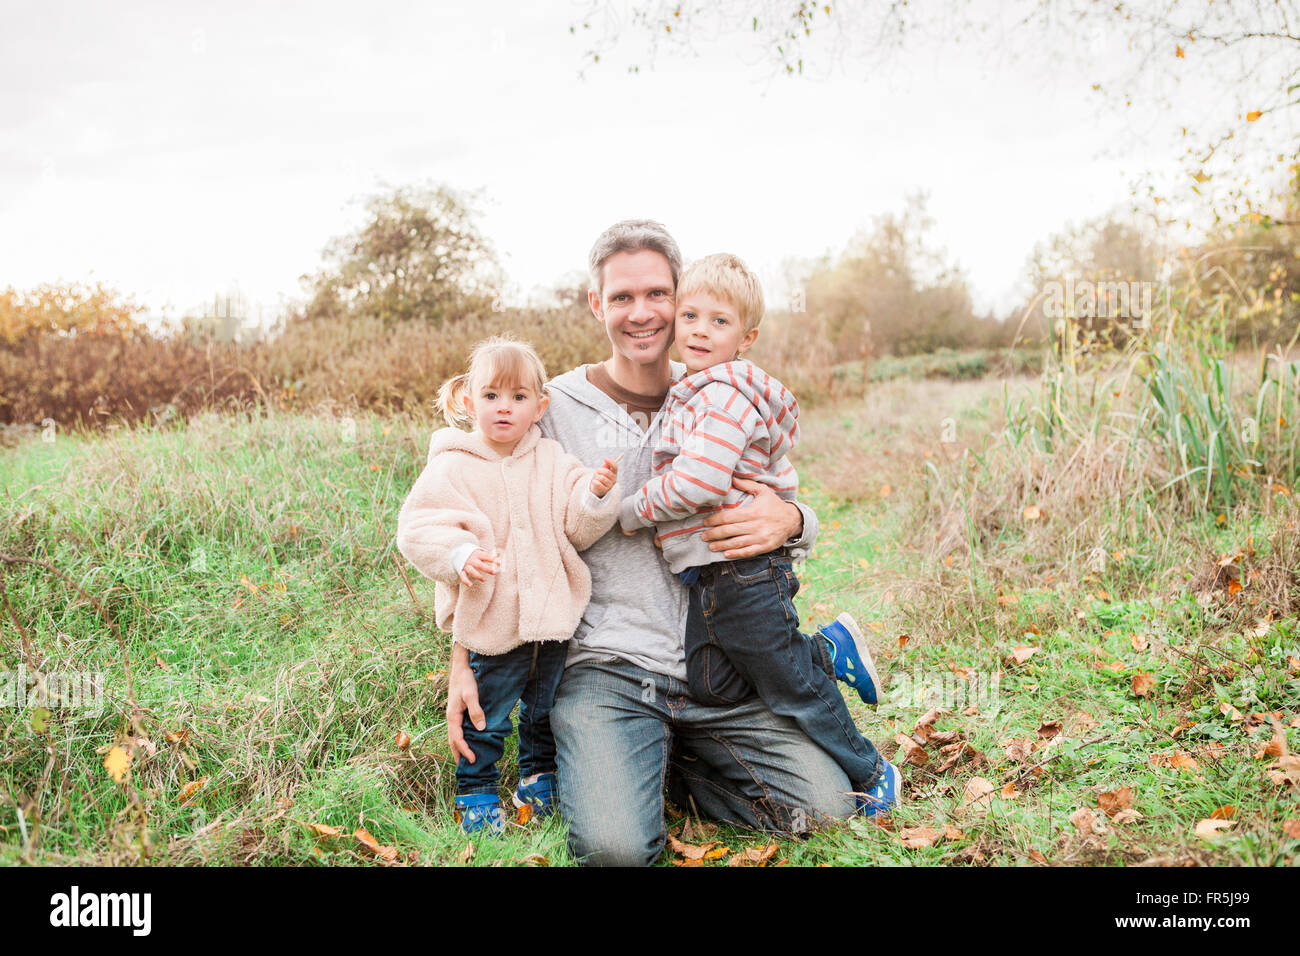 Portrait smiling father and toddler children in autumn park Stock Photo